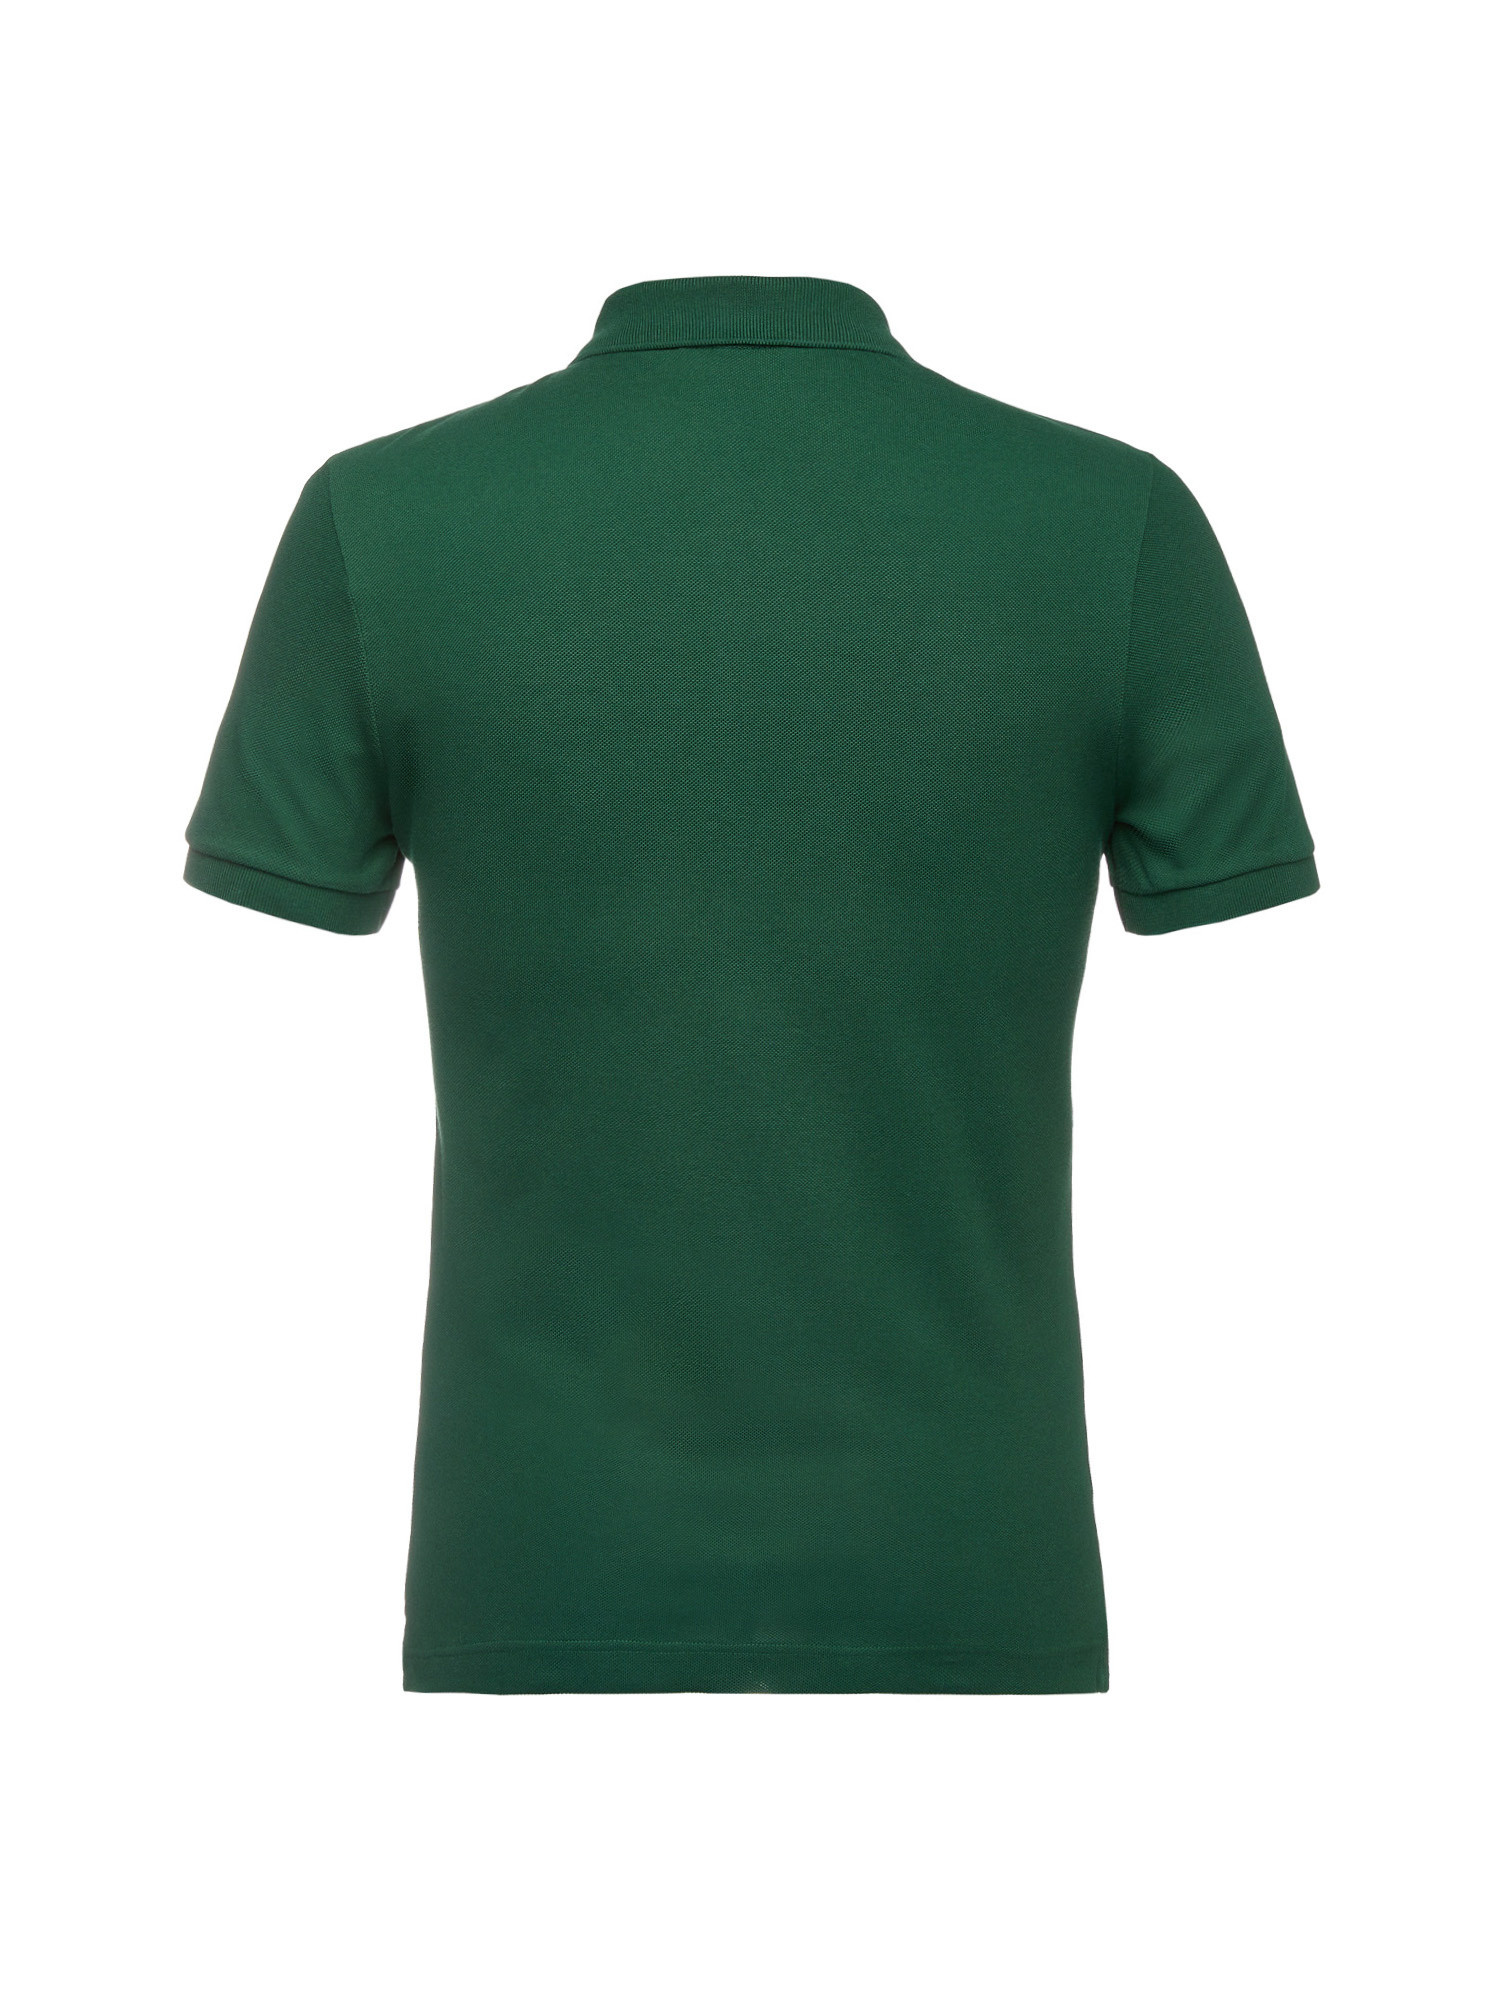 Polo shirt, Green, large image number 1